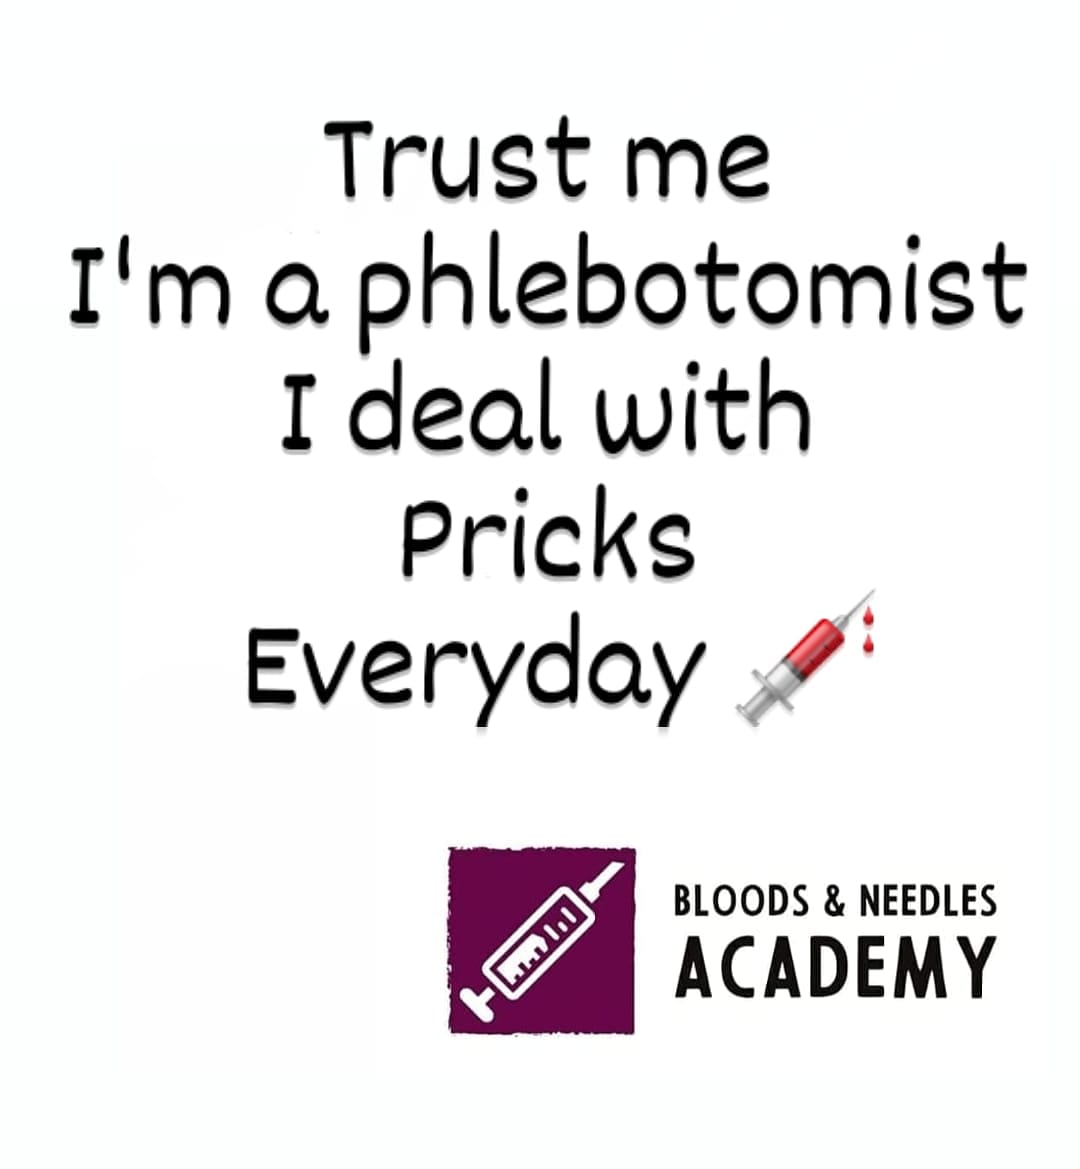 Images Bloods And Needles Academy Ltd